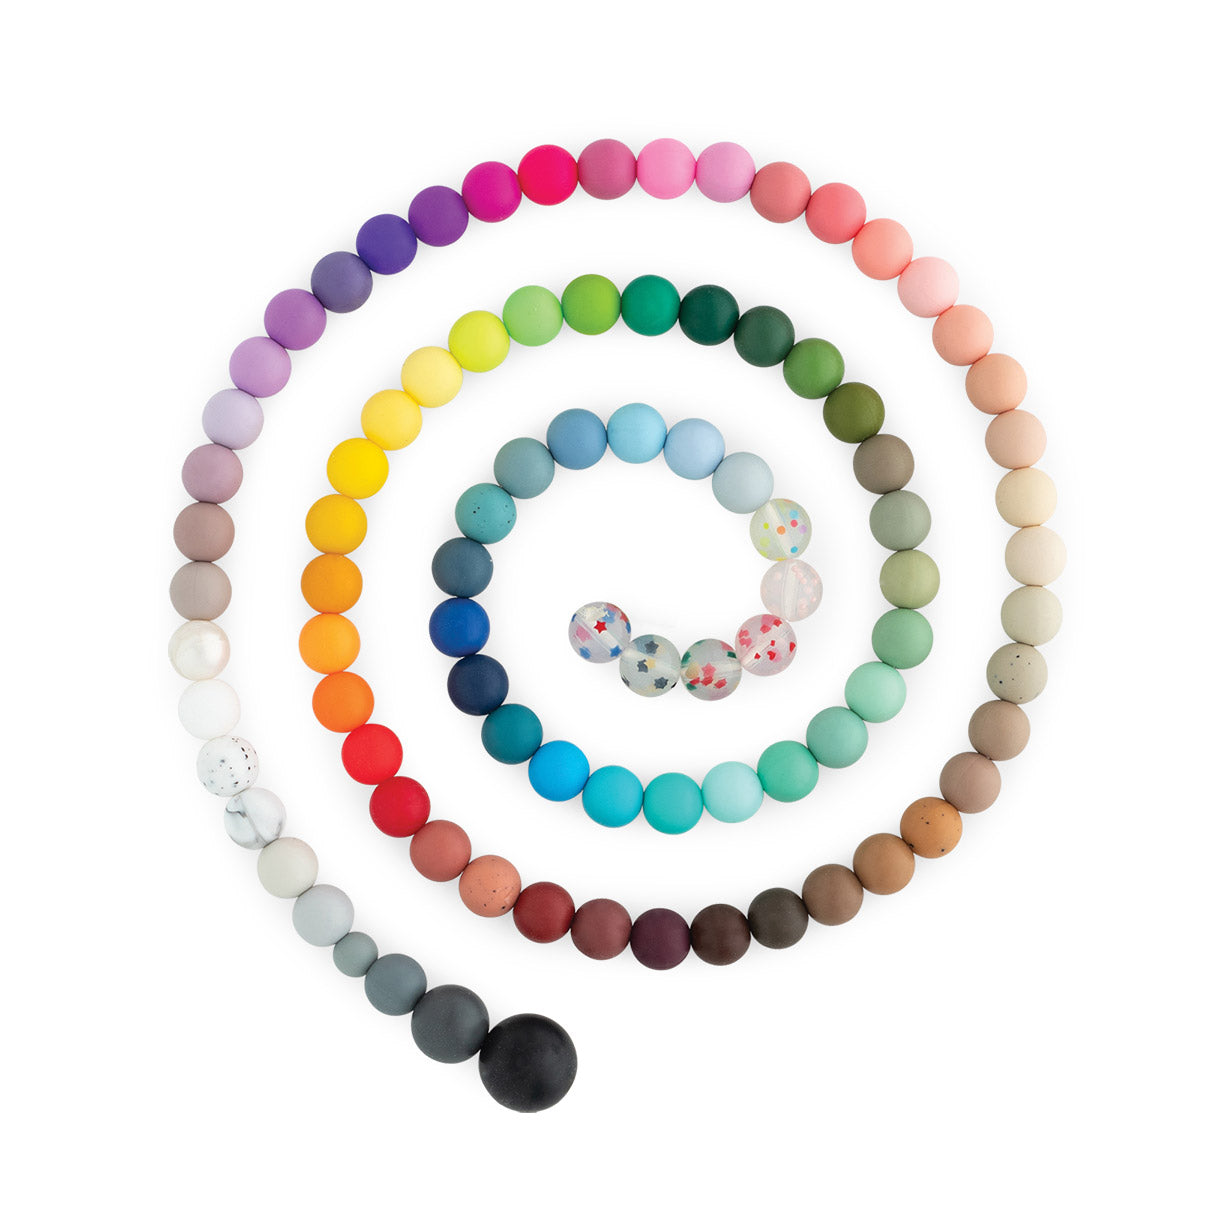 Silicone Round Beads Sample Color Cord from Cara & Co Craft Supply